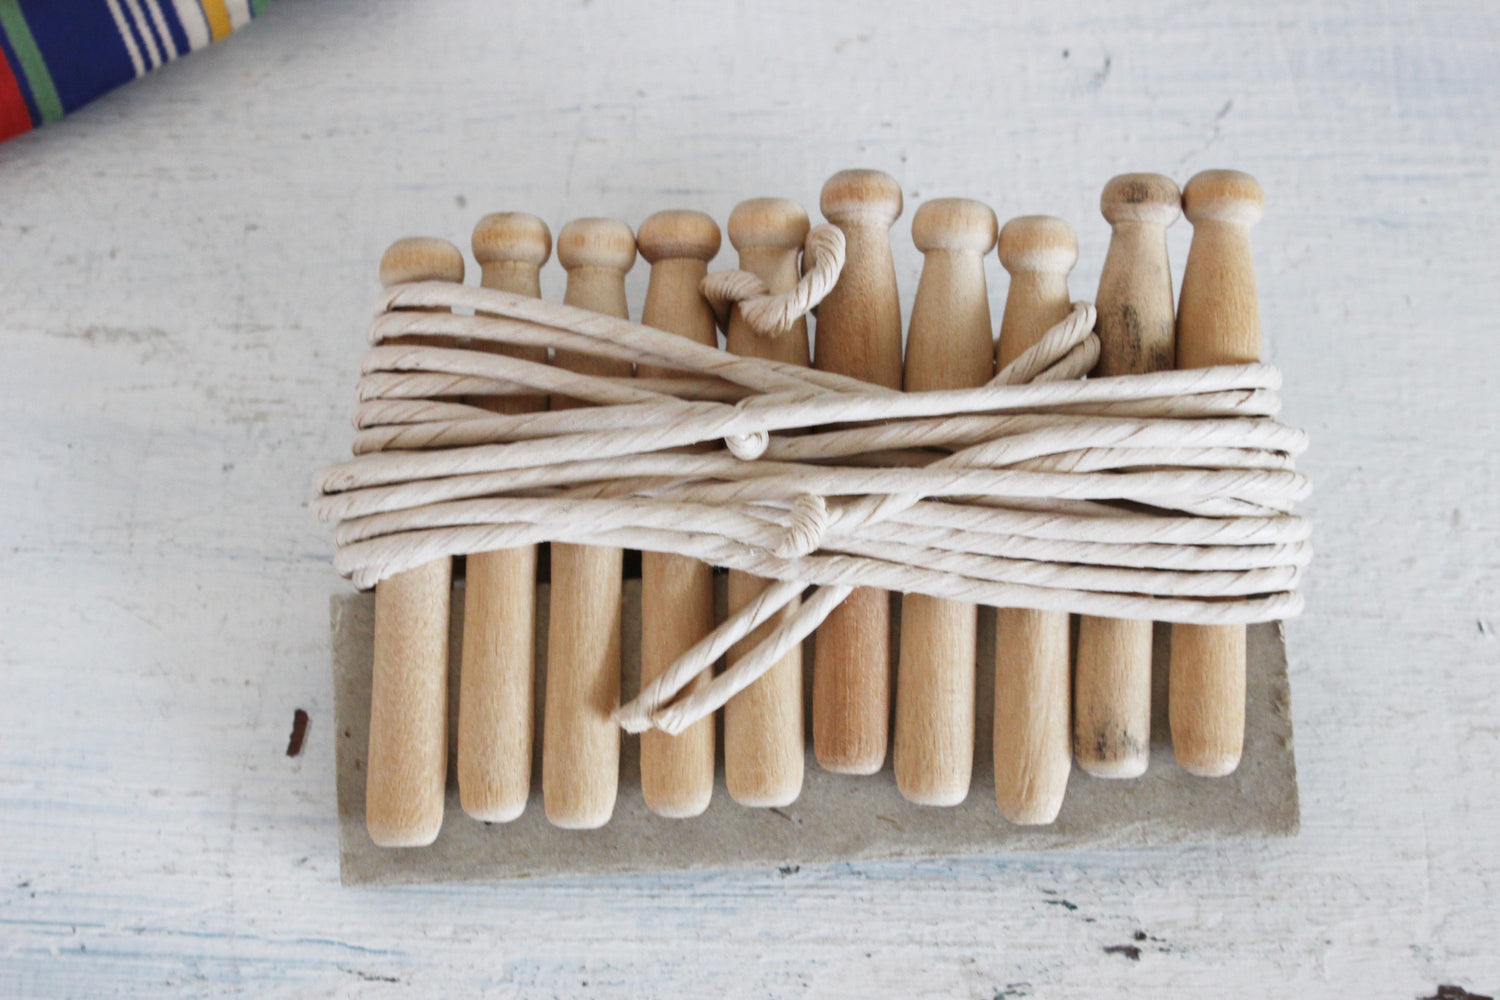 Vintage 1940s Travel Laundry Line / Wooden Clothes Pins